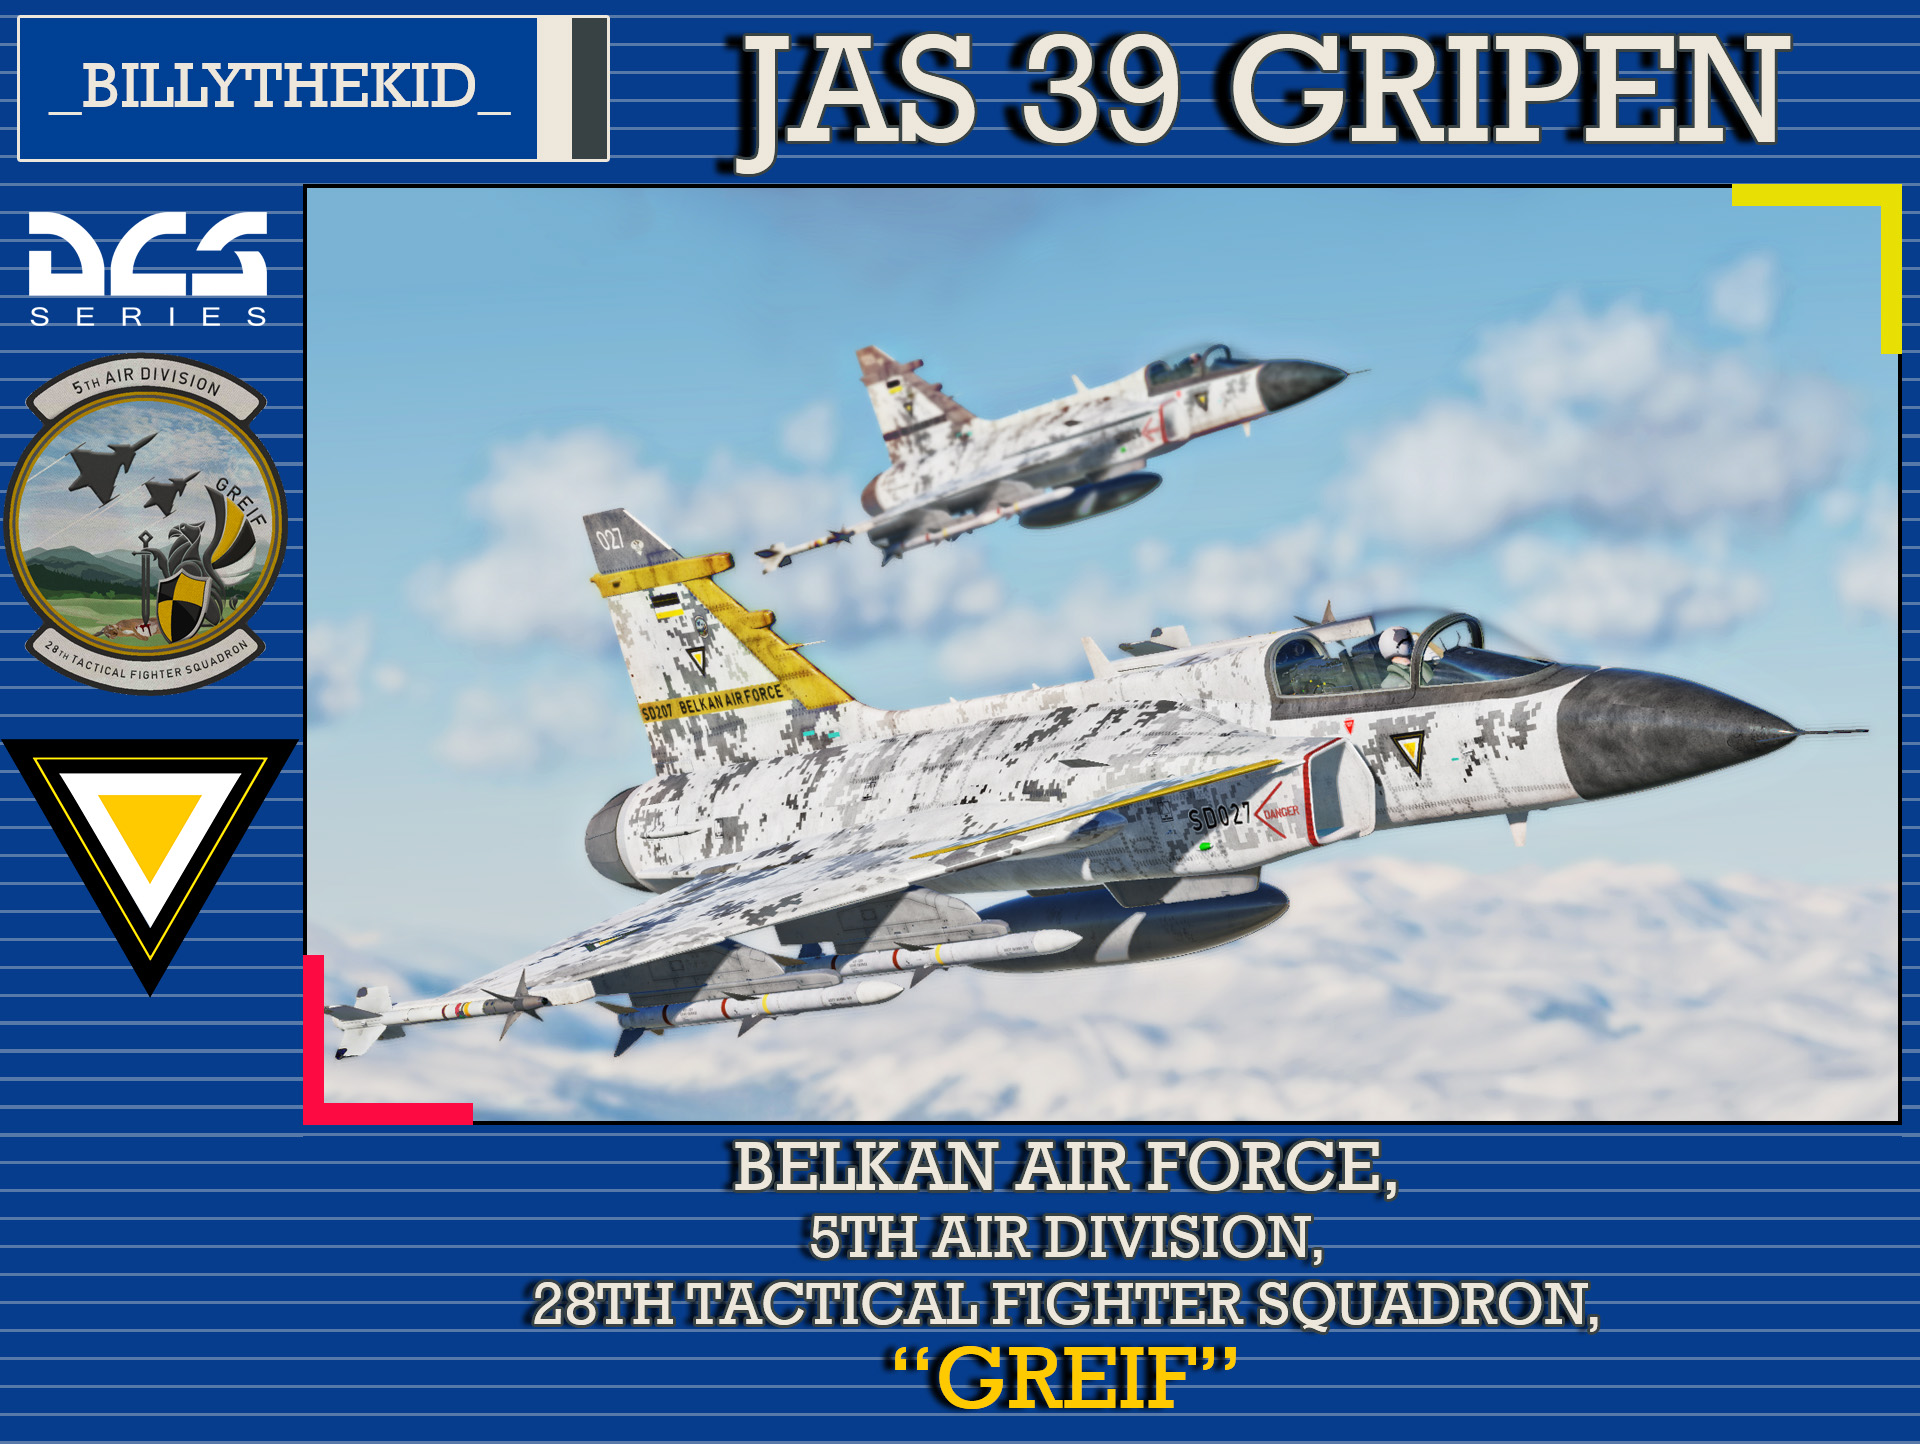 Ace Combat - Belkan Air Force 5th Air Division, 28th Tactical Fighter Squadron "Greif" JAS 39 Gripen